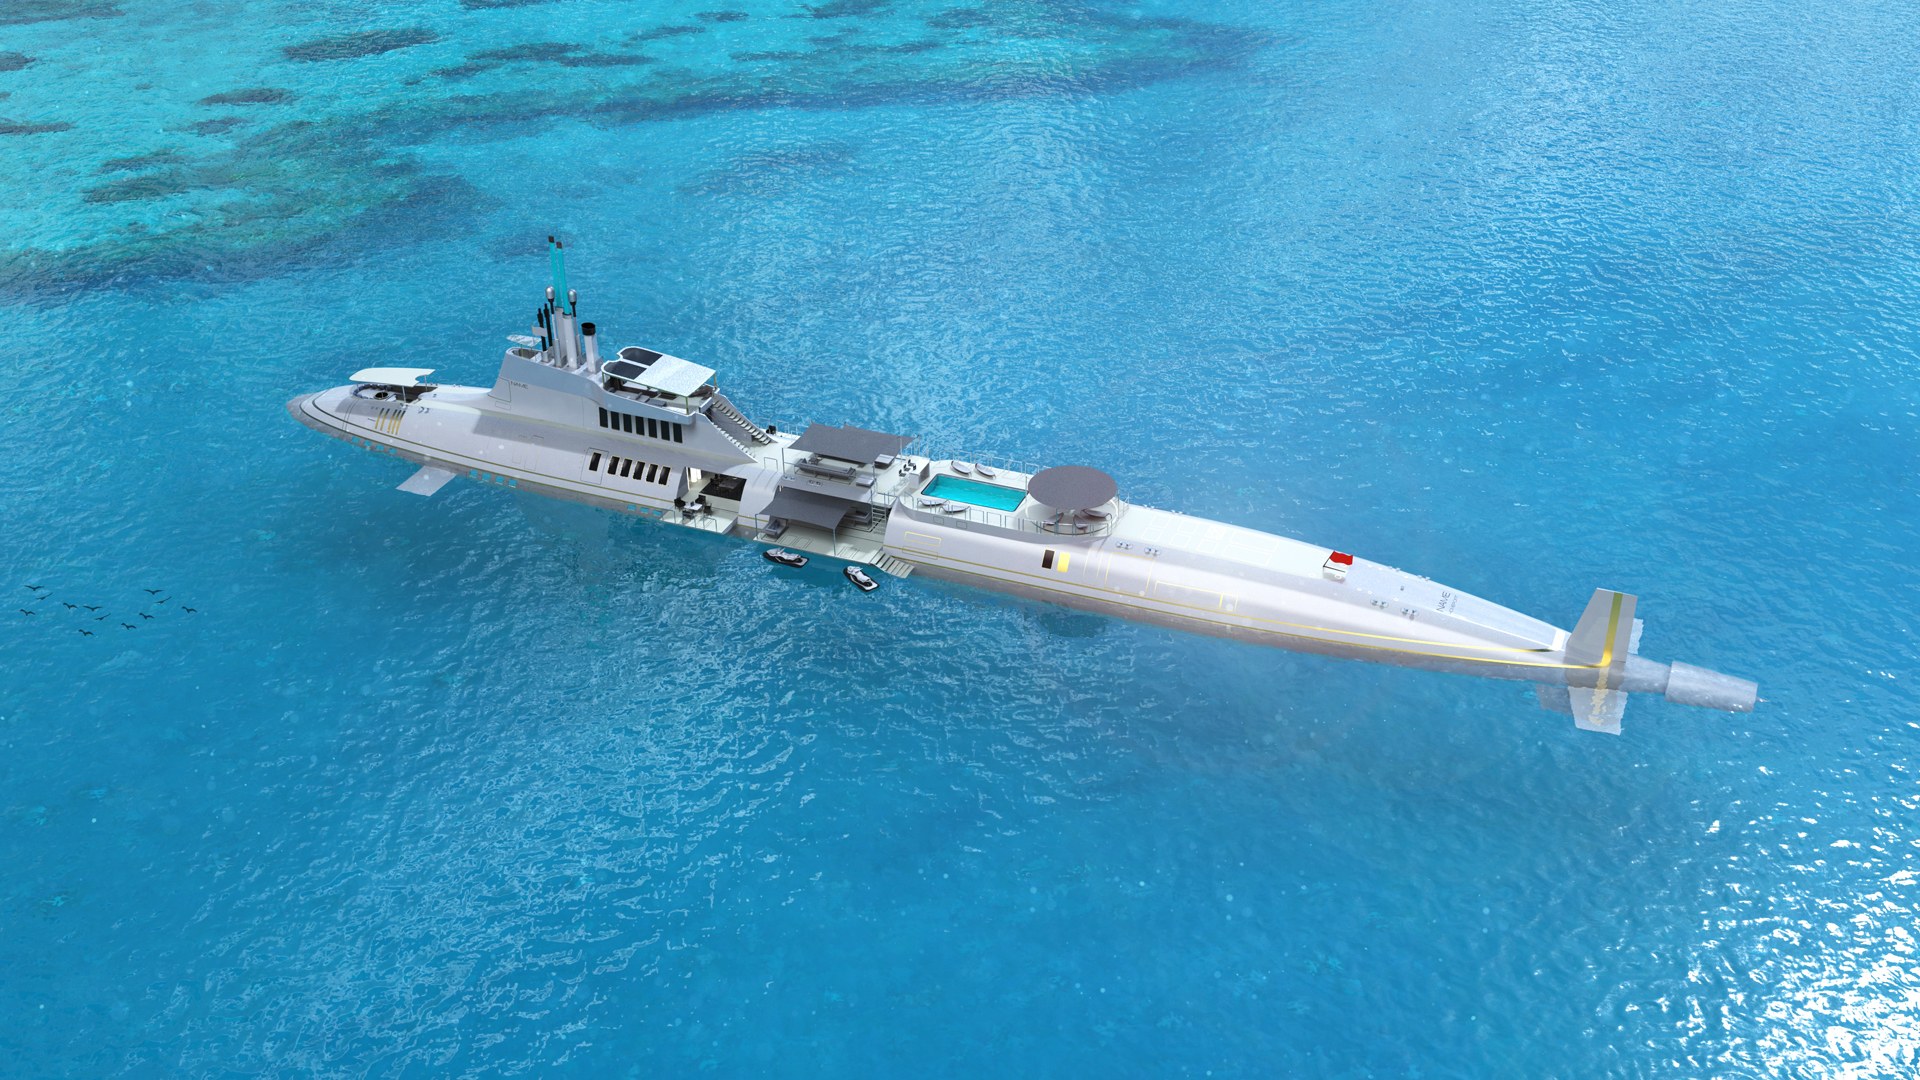 This Submersible Yacht Comes With Luxury Amenities luxury yacht diagram 